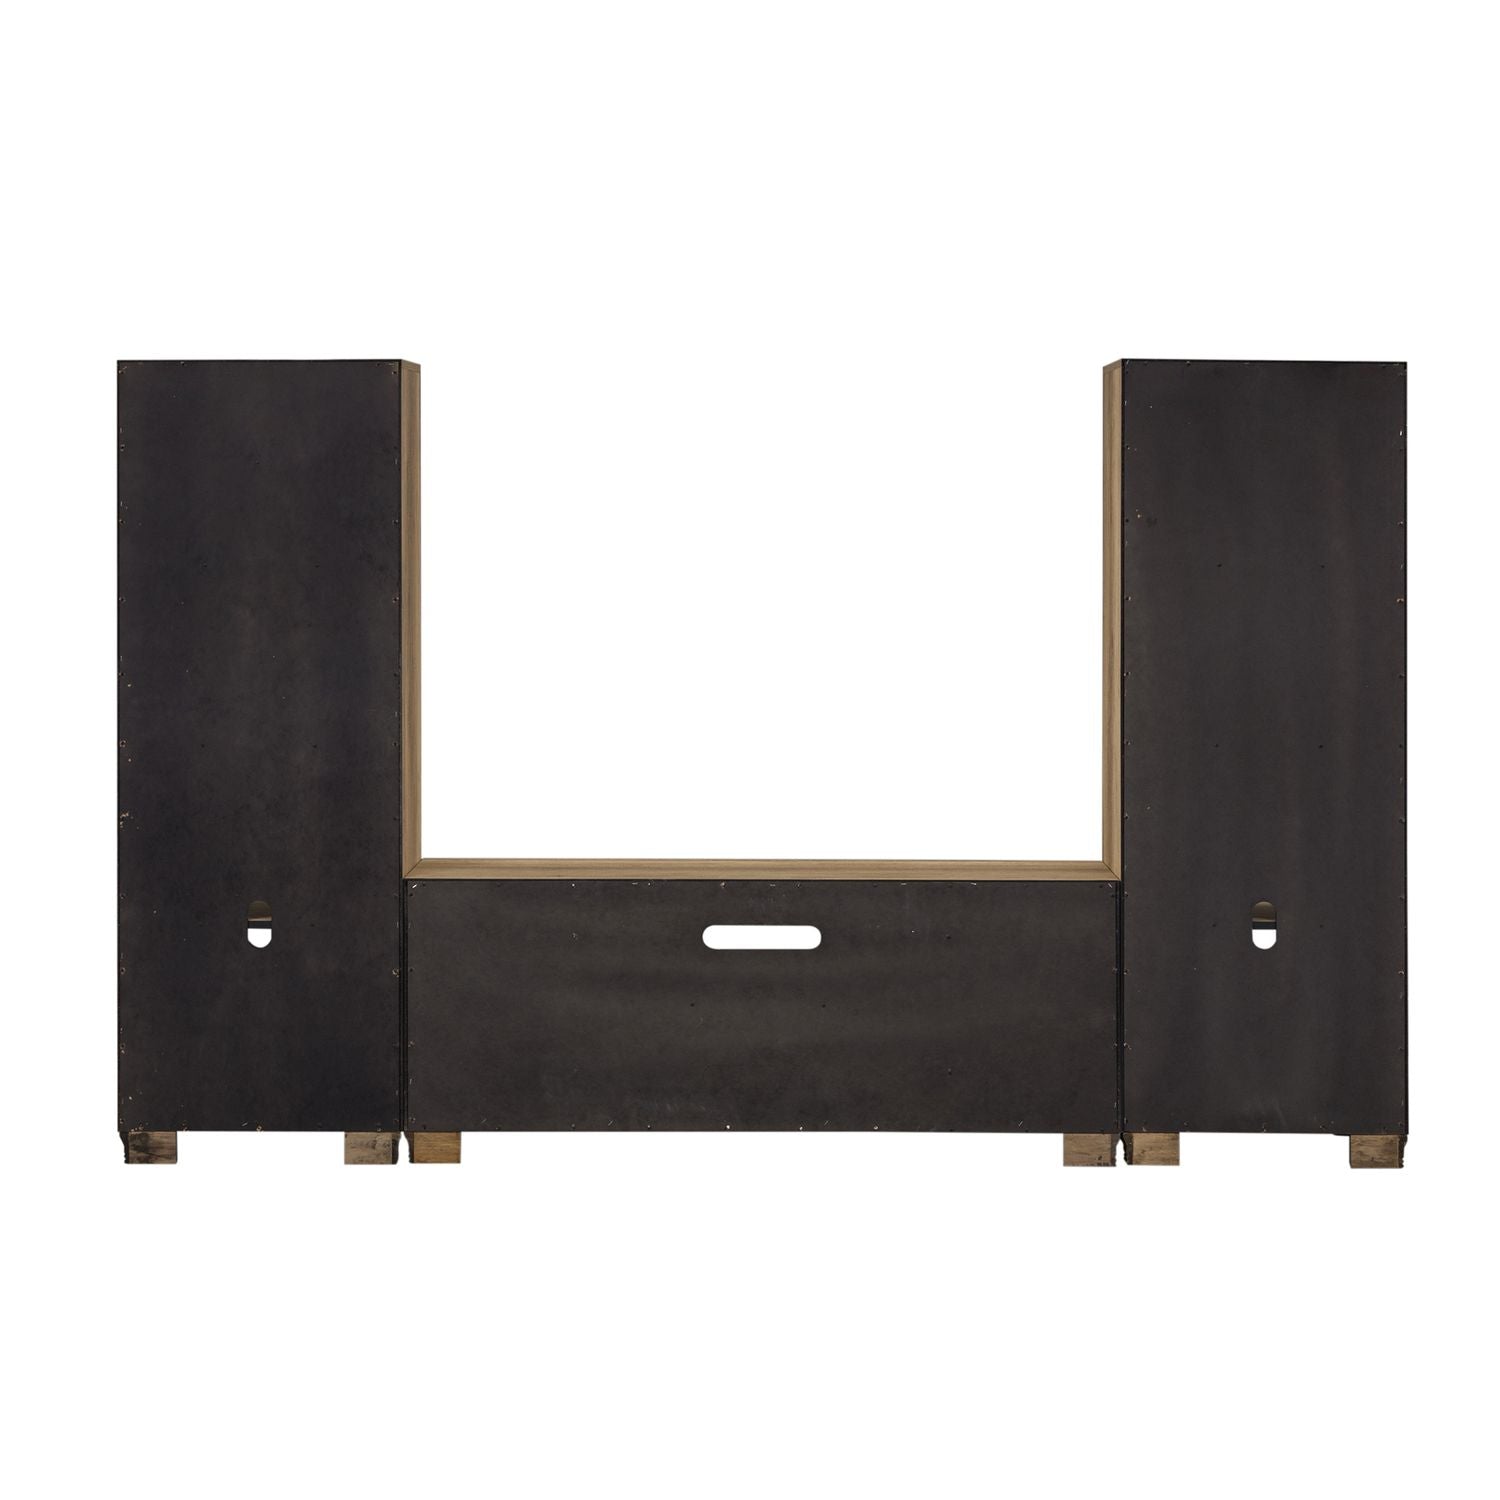 Haakenson Entertainment Center TV Stand w Piers